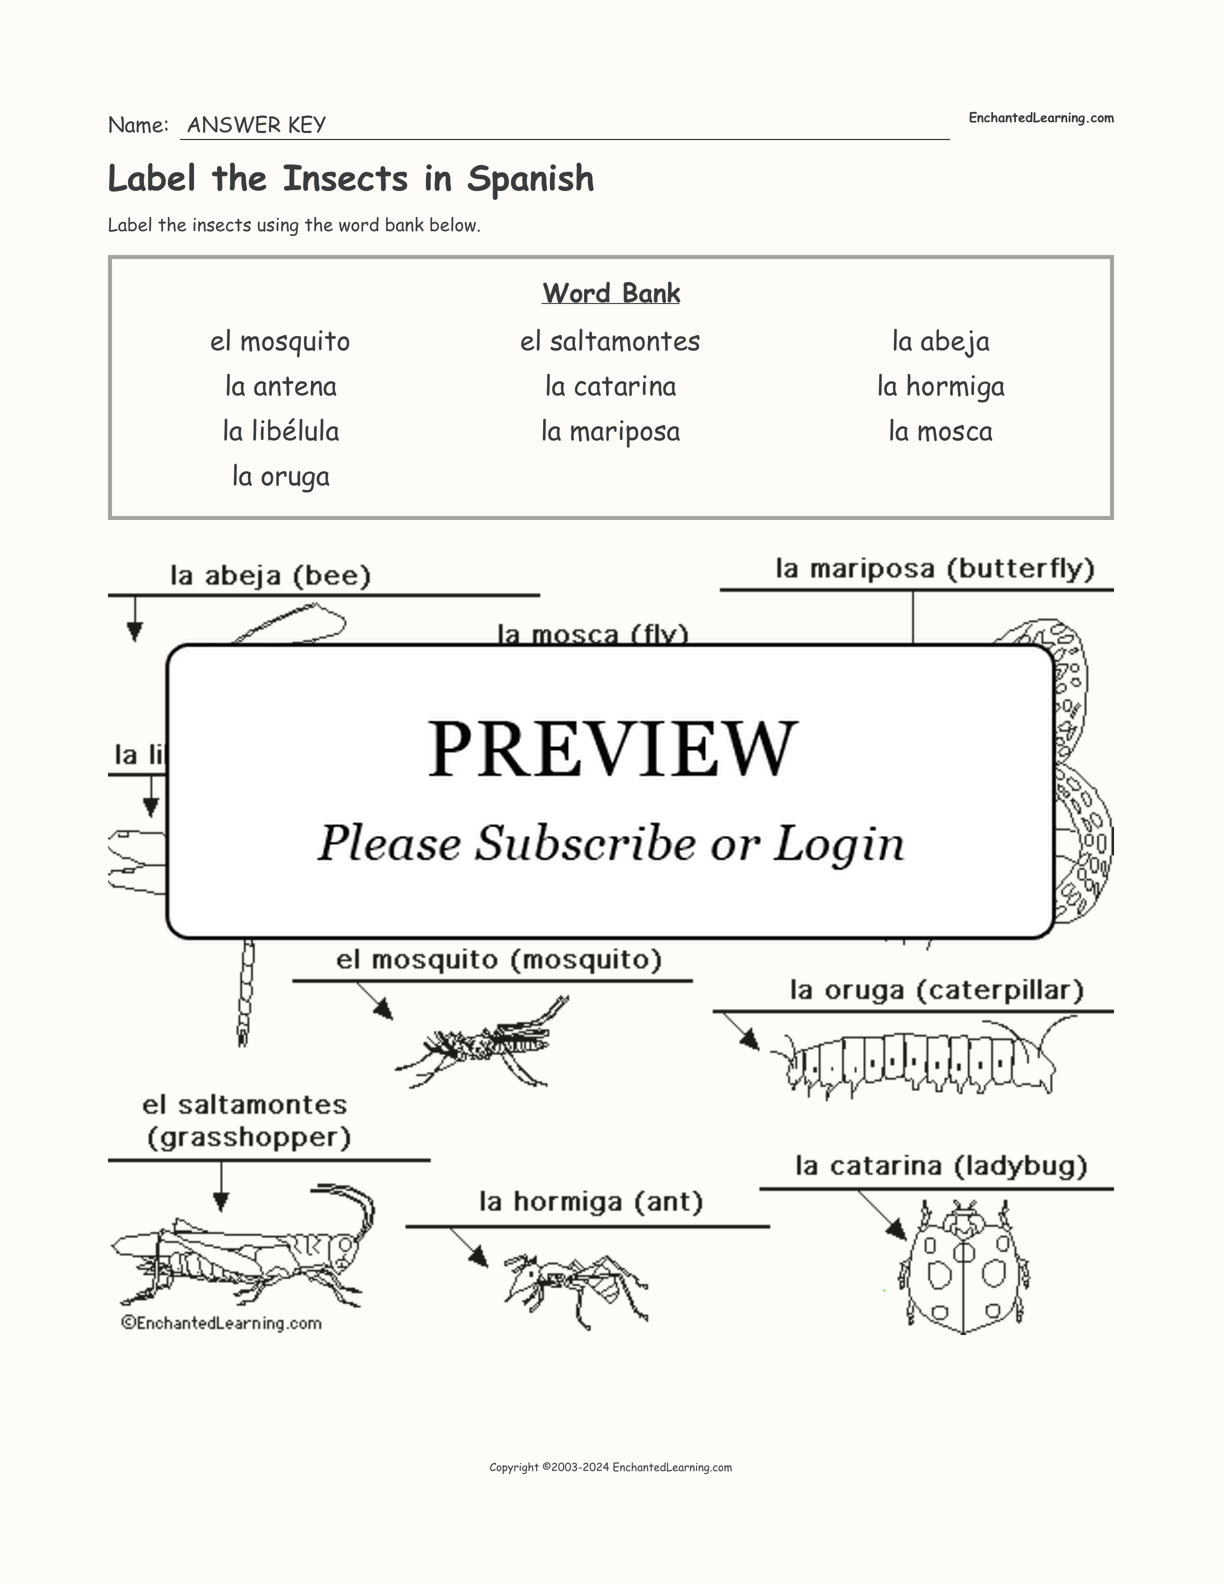 Label the Insects in Spanish interactive worksheet page 2